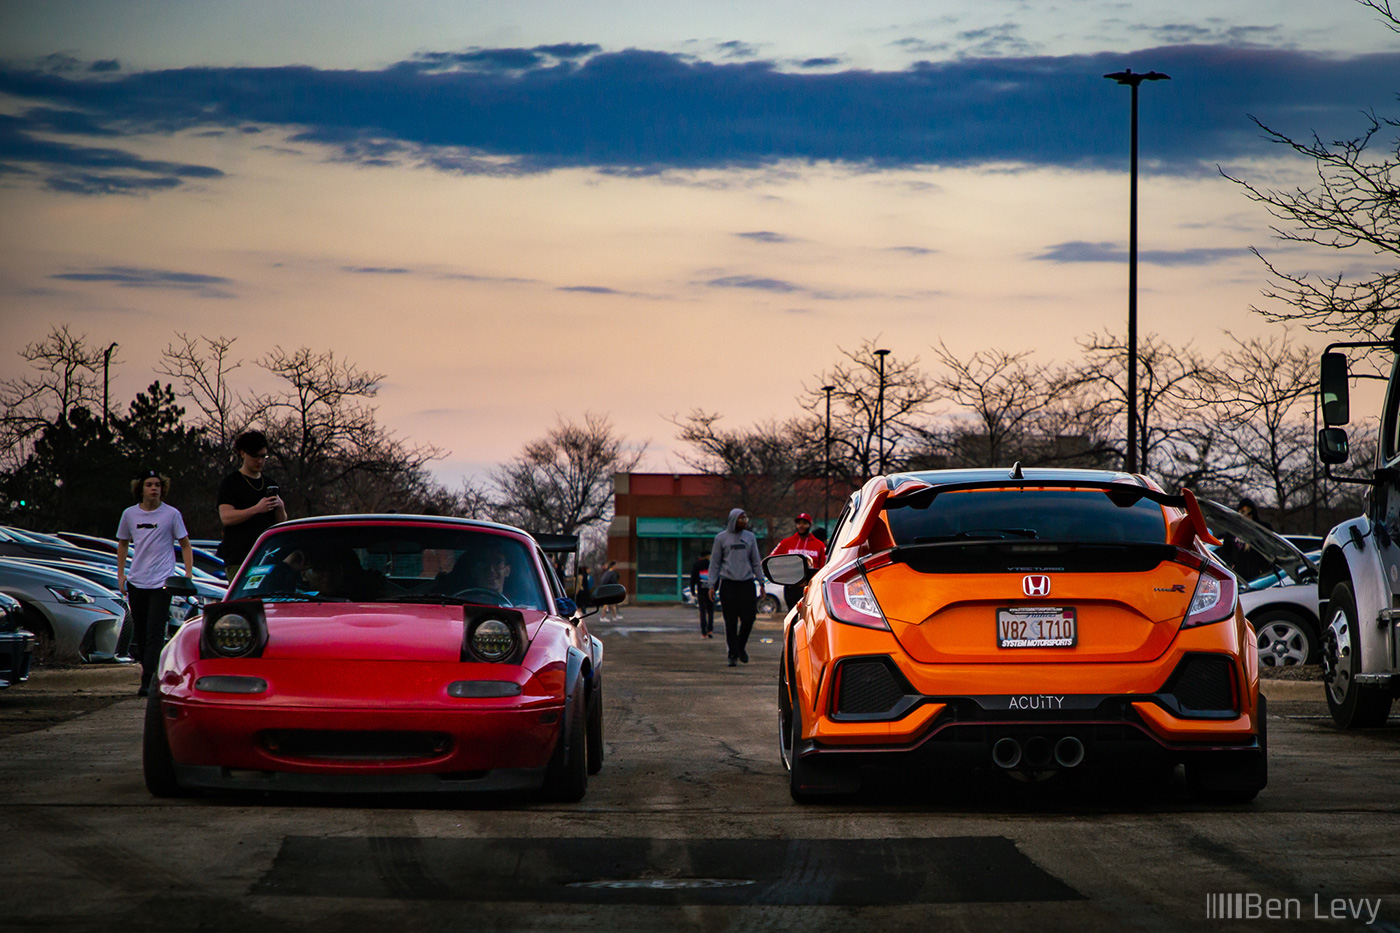 Miata and Civic at Cars and Culture Meet